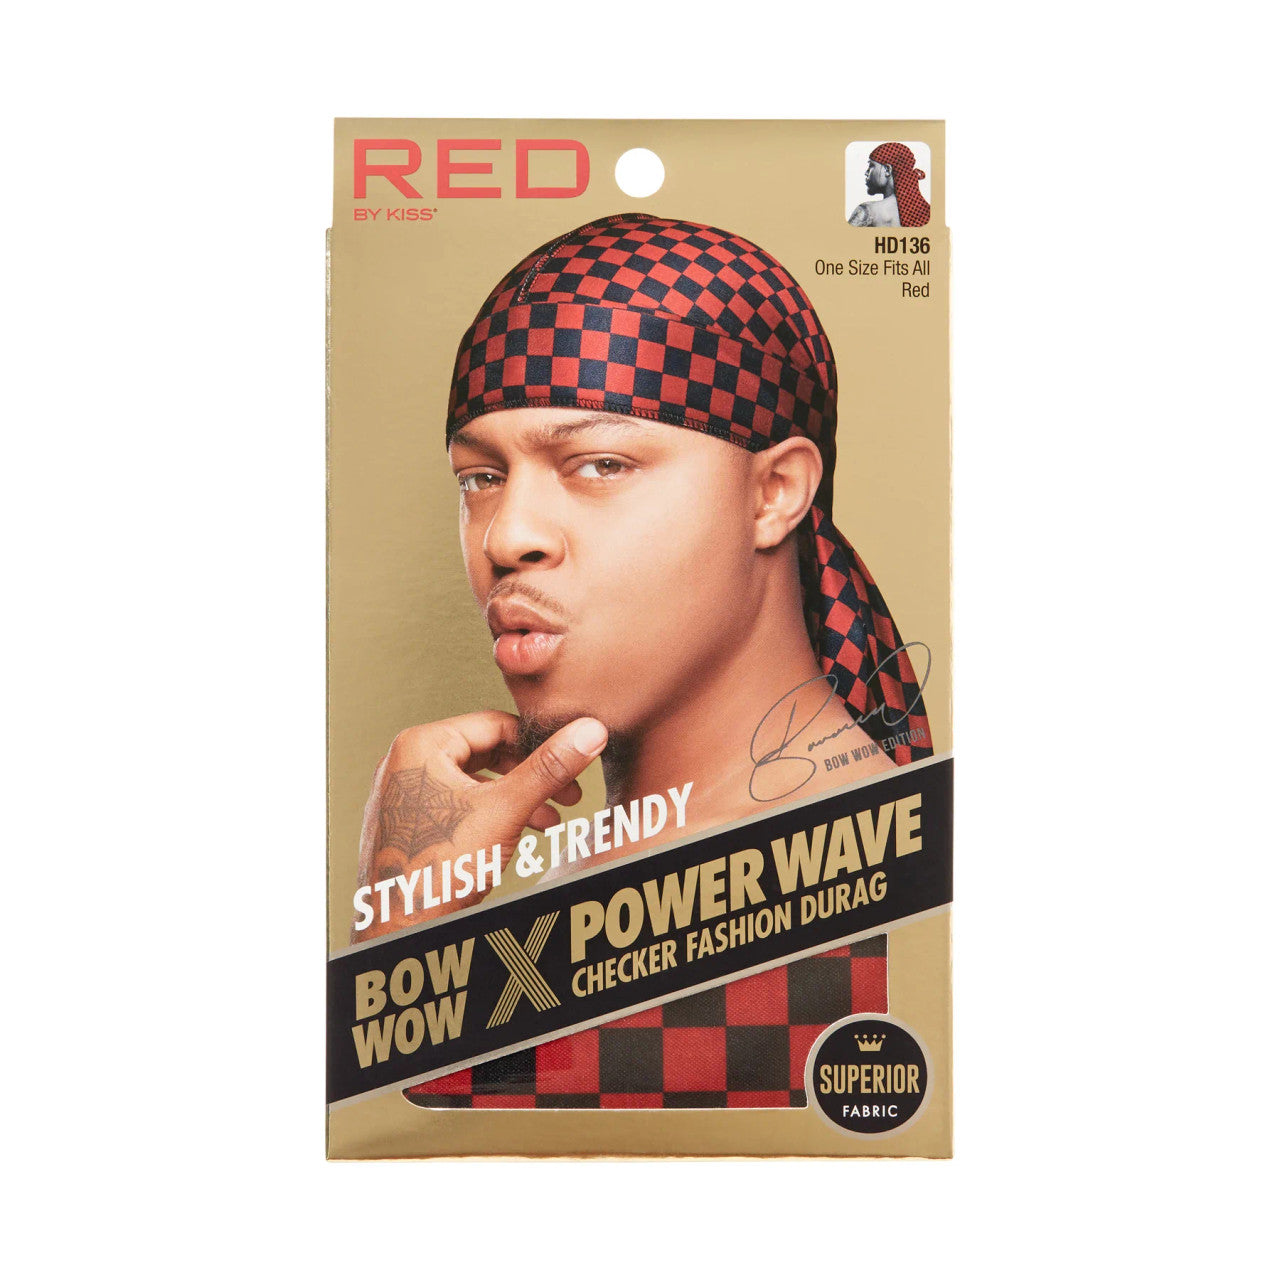 Red by Kiss BOW WOW X Power Wave Checker Fashion Durag - Red- HD136